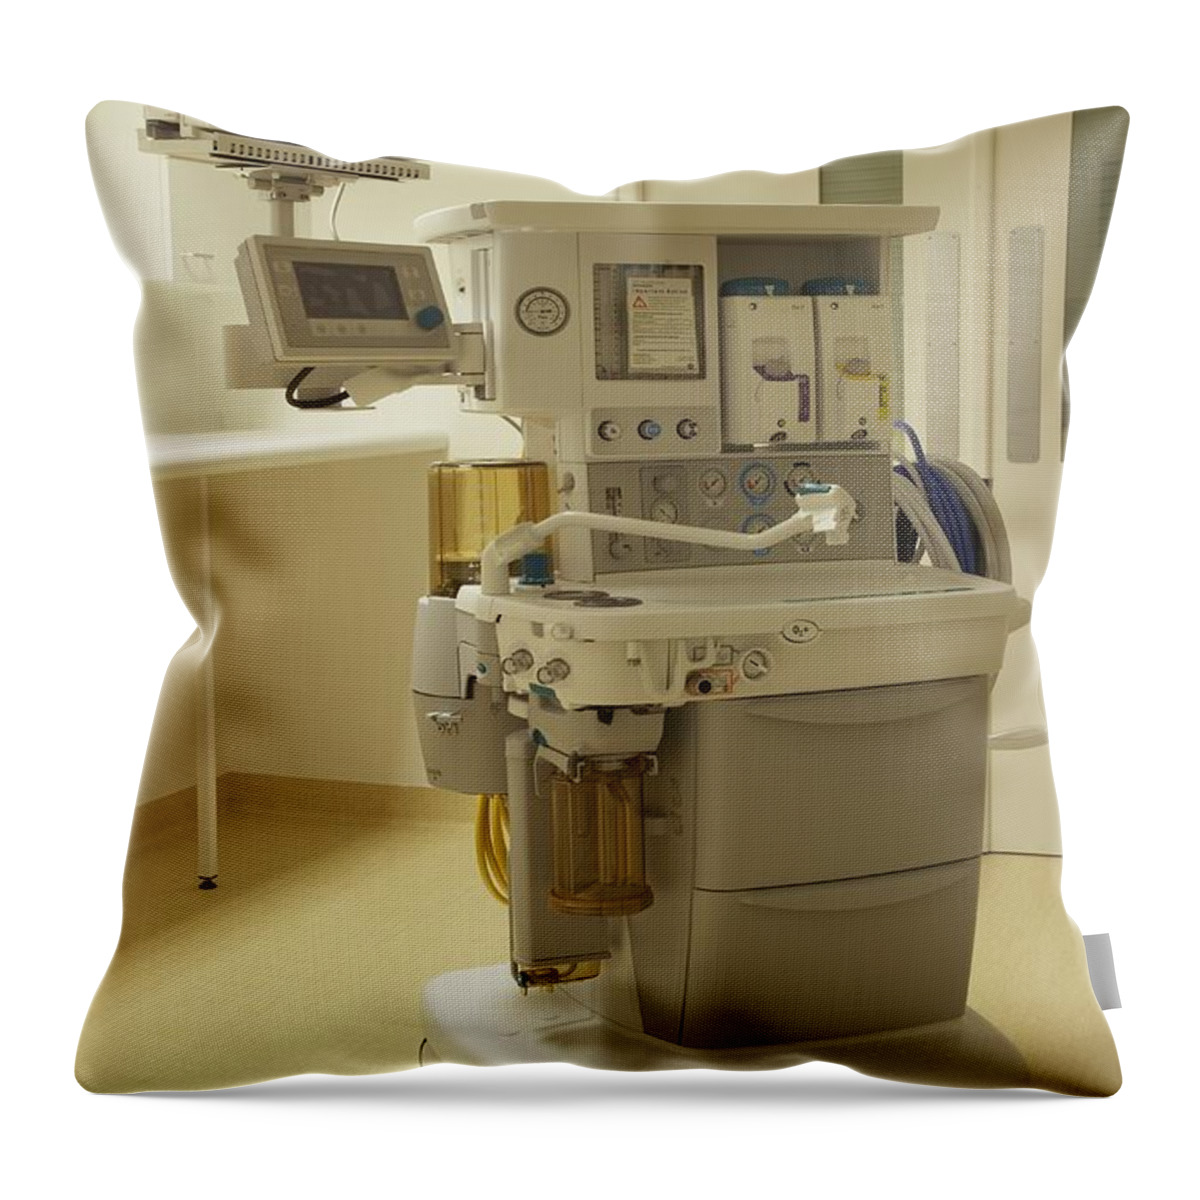 Computer Monitor Throw Pillow featuring the photograph Maternity Ward Equipment by Ruth Jenkinson / Dorling Kindersley